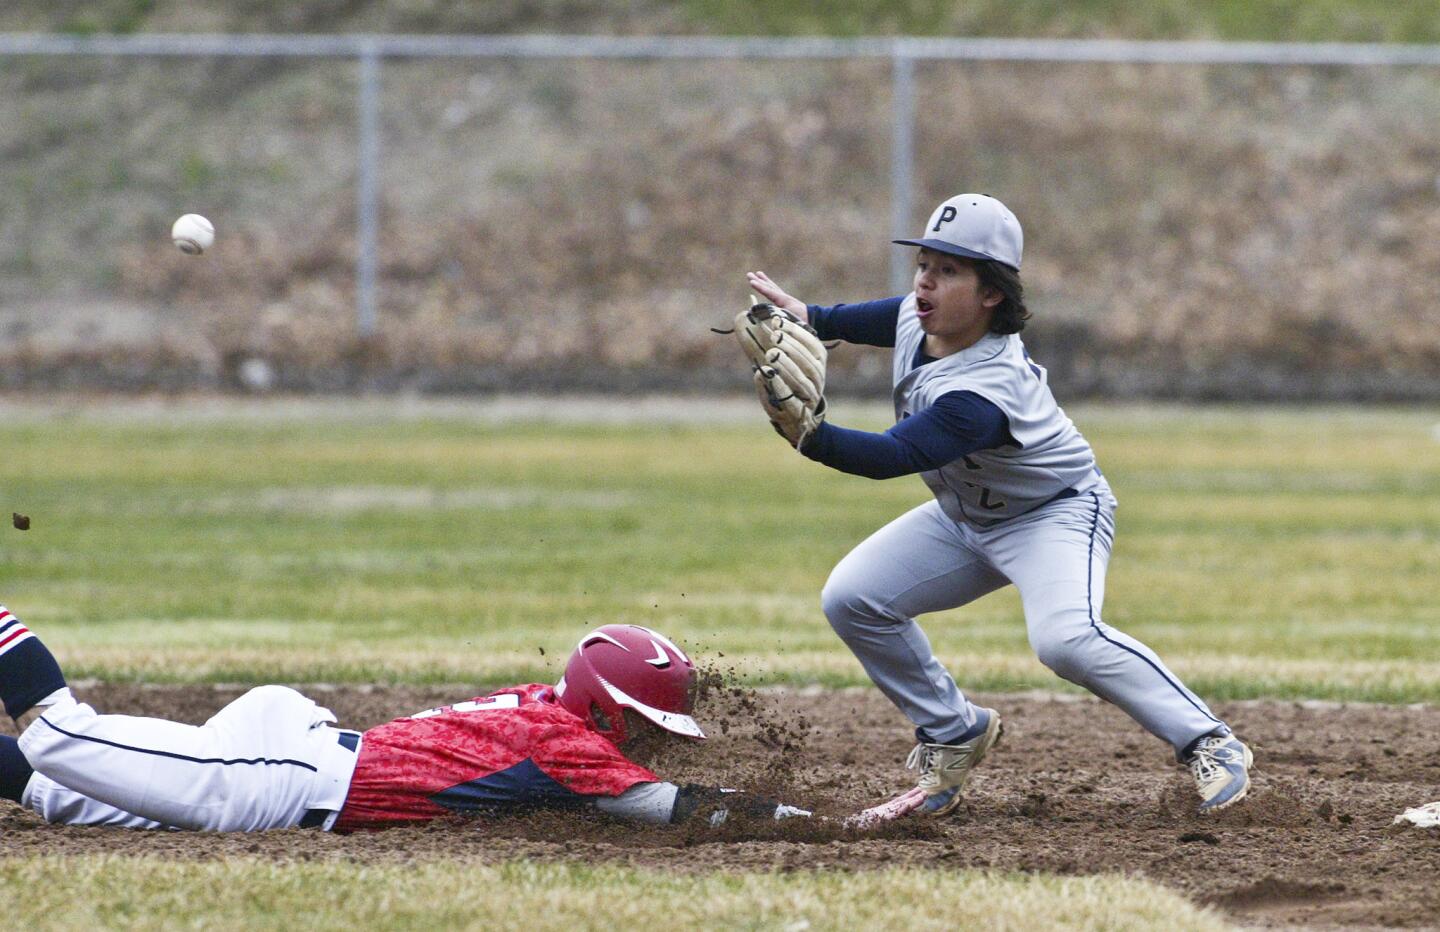 Avon runner Zack Aiello makes it back to 2nd in a pick-off attempt with Platt second baseman Peyton Theil. Platt plays Avon High School at Avon Tuesday. Michael McAndrews - Special to the Hartford Courant